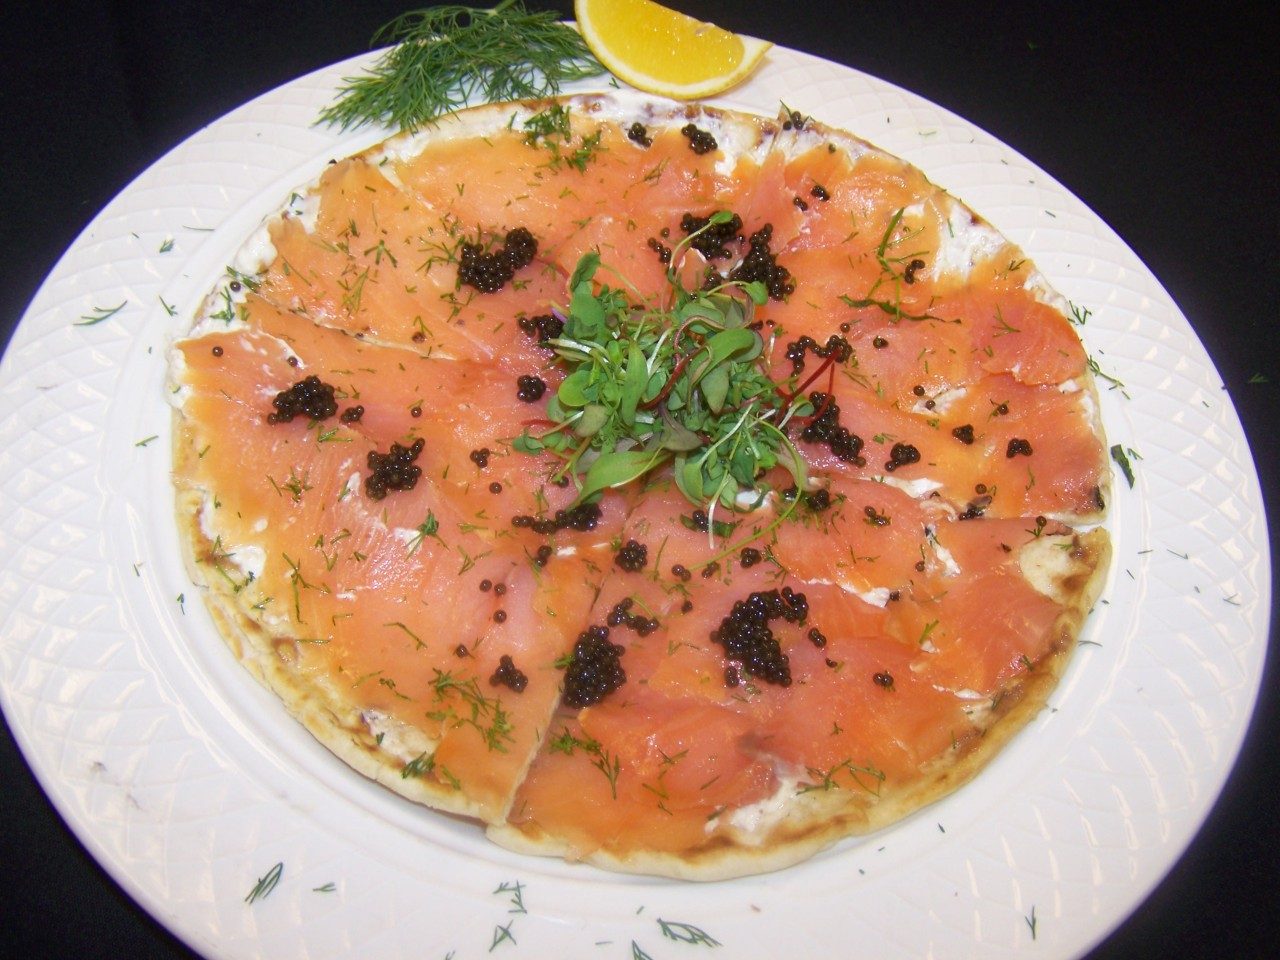 Preston’s smoked salmon flatbread features fresh dill from the garden. 